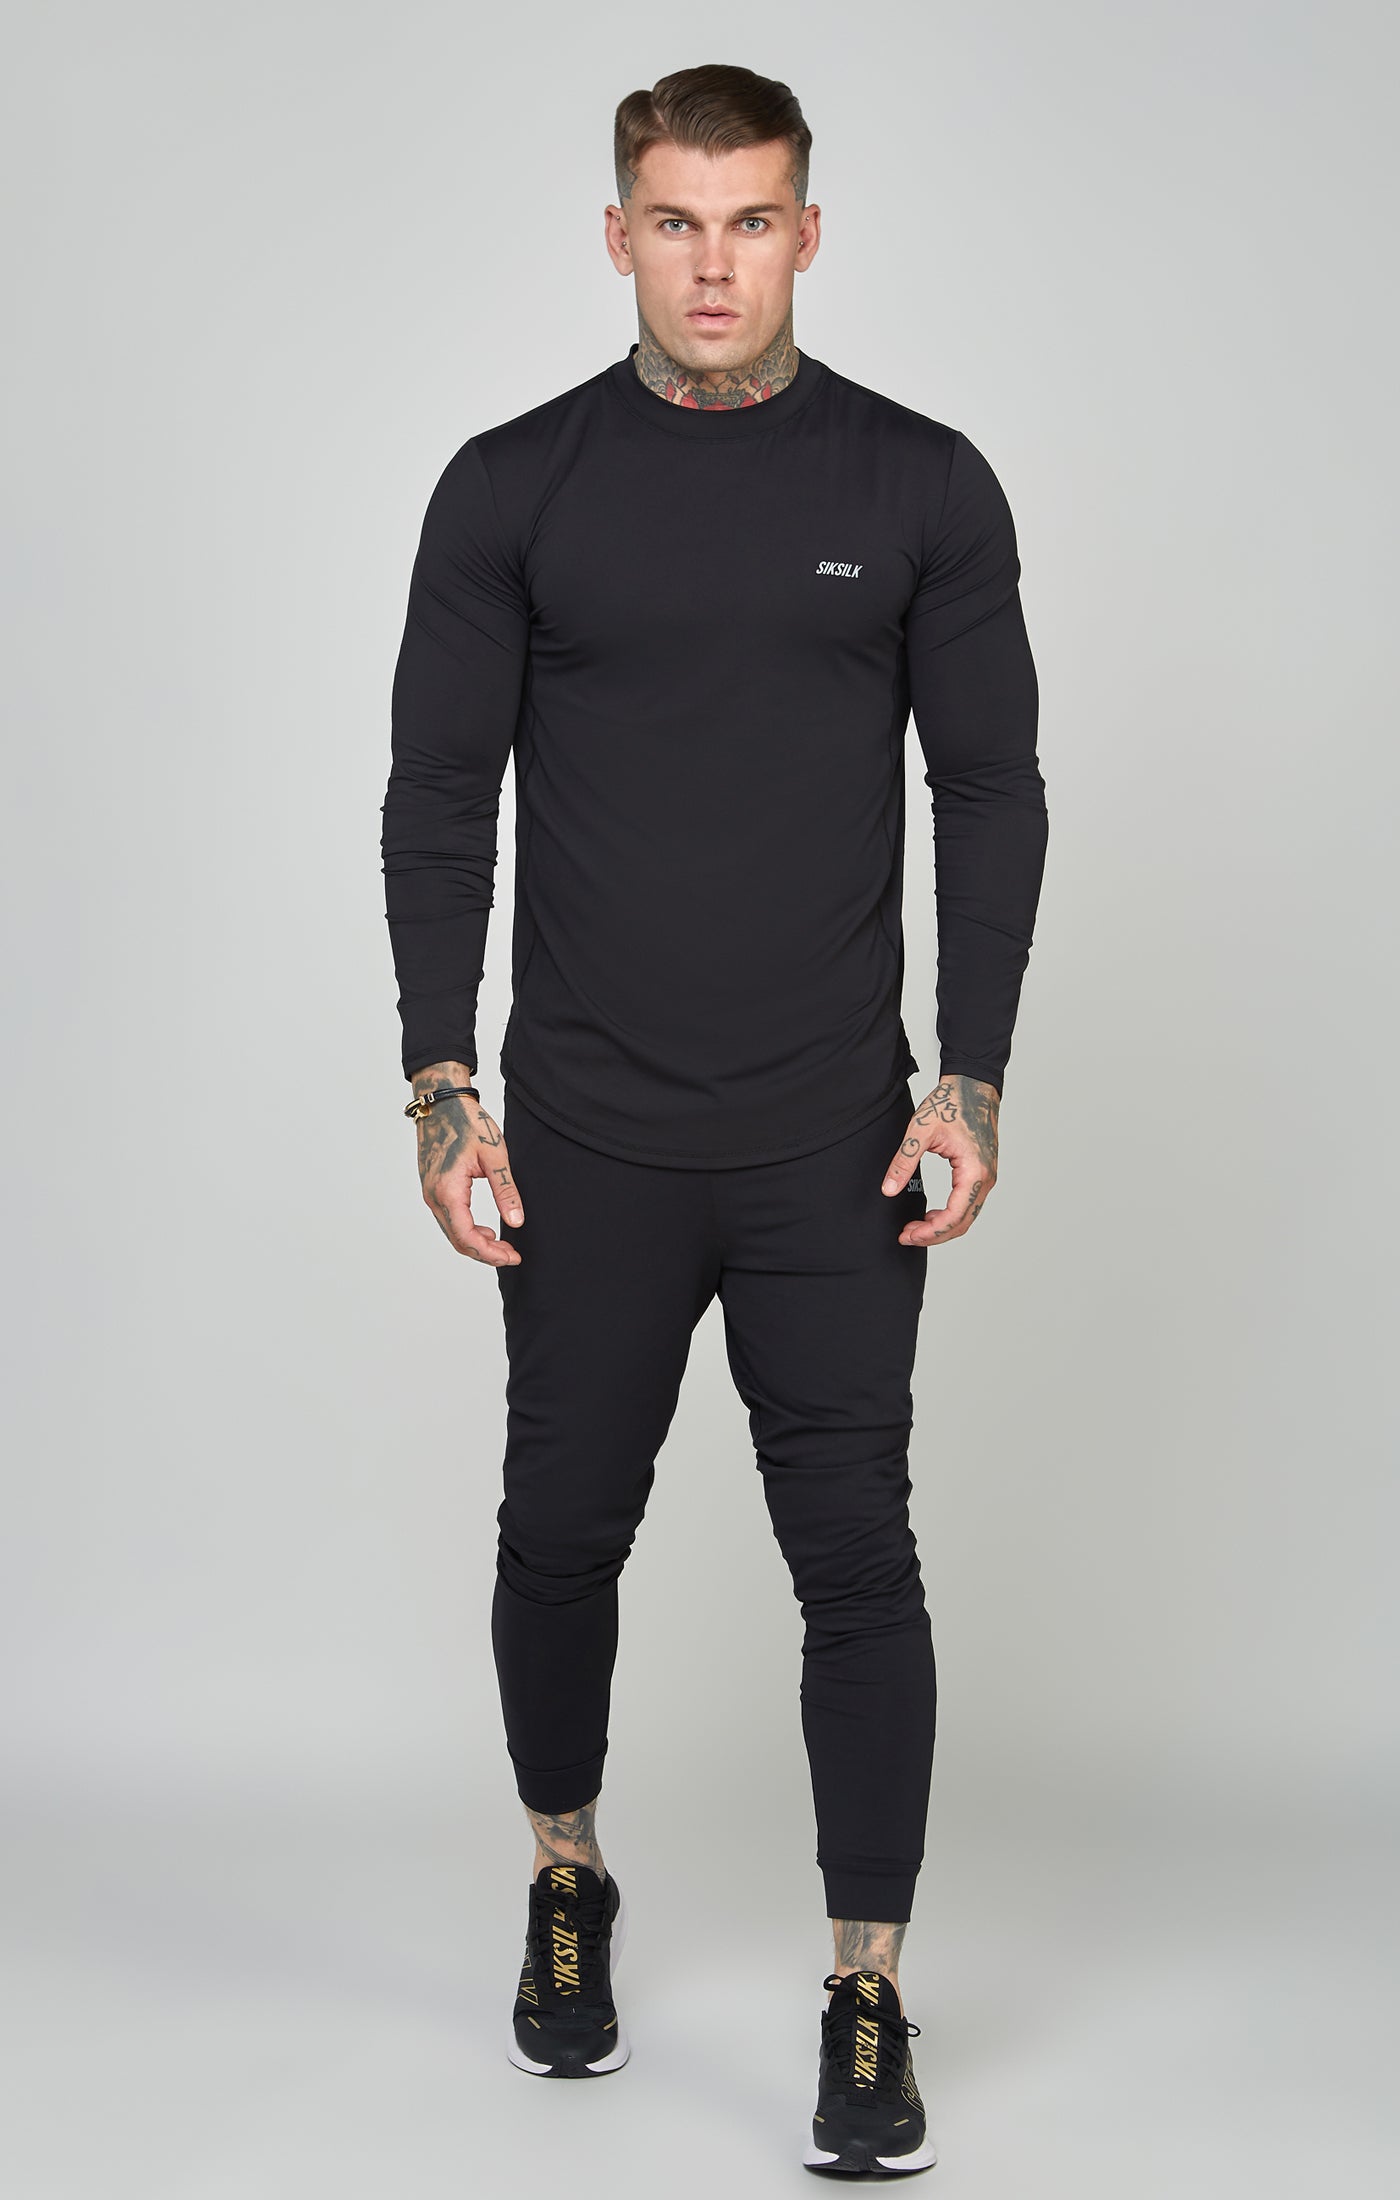 Black Sports Muscle Fit Long Sleeve Top (1)